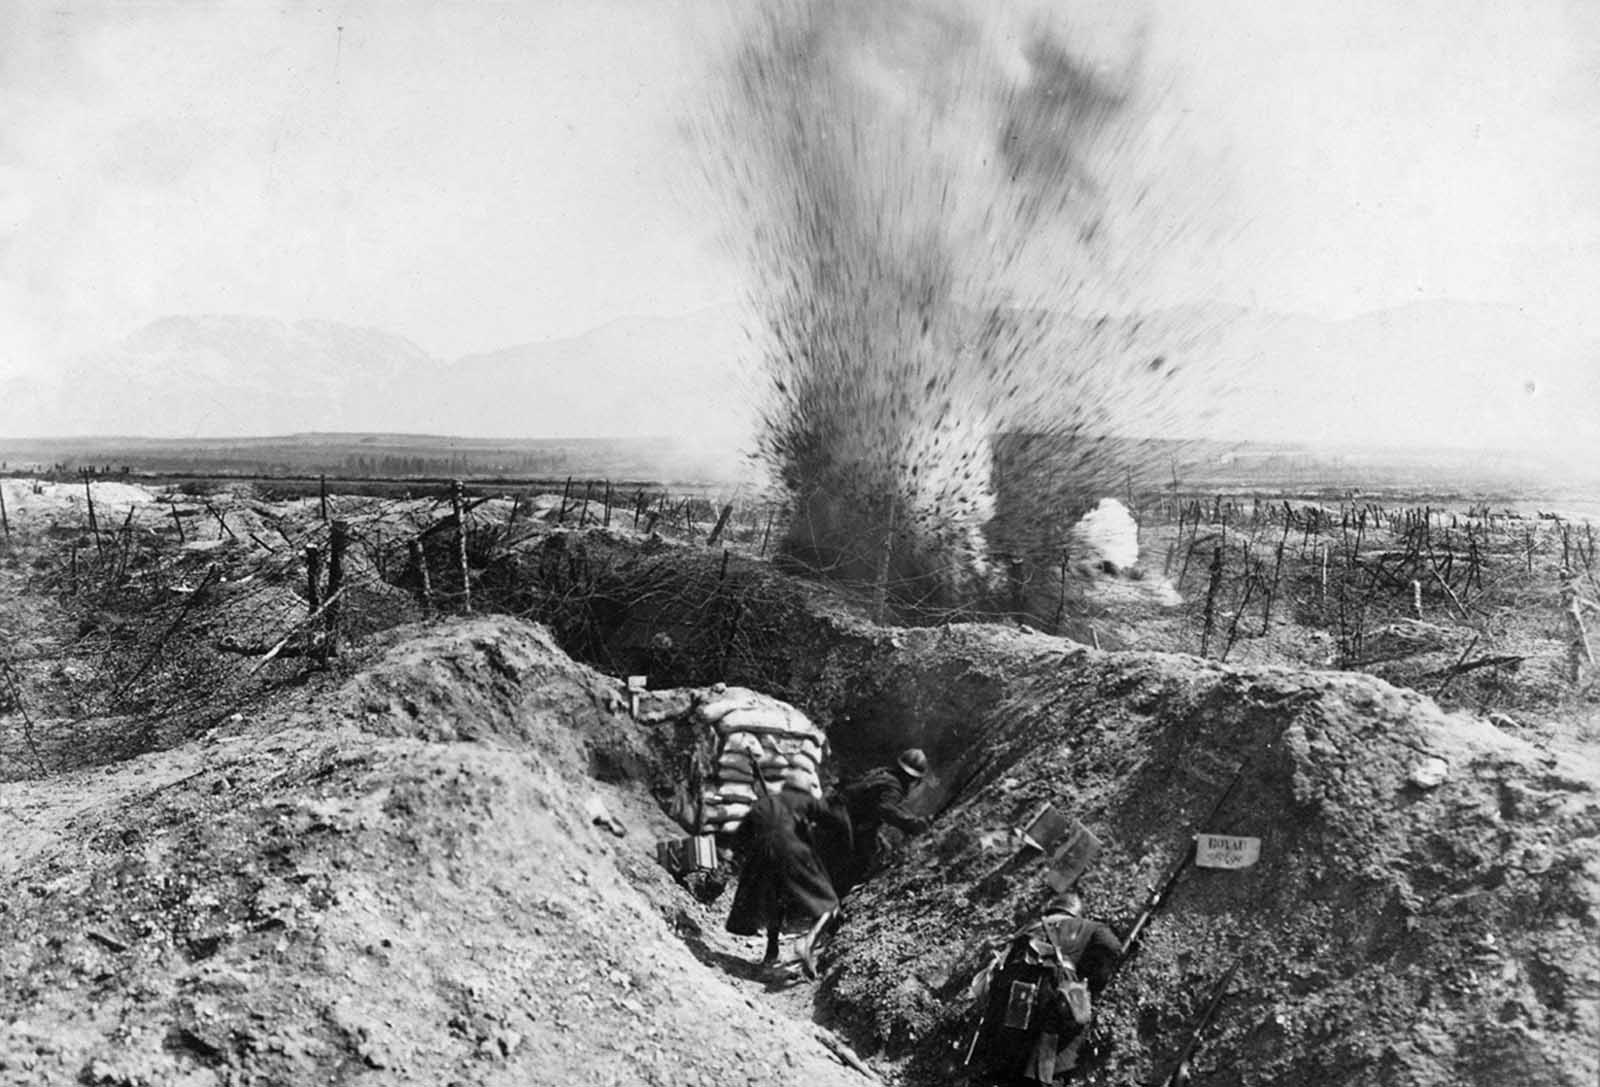 An explosion near trenches dug into the grounds of Fort de la Pompelle, near Reims, France.